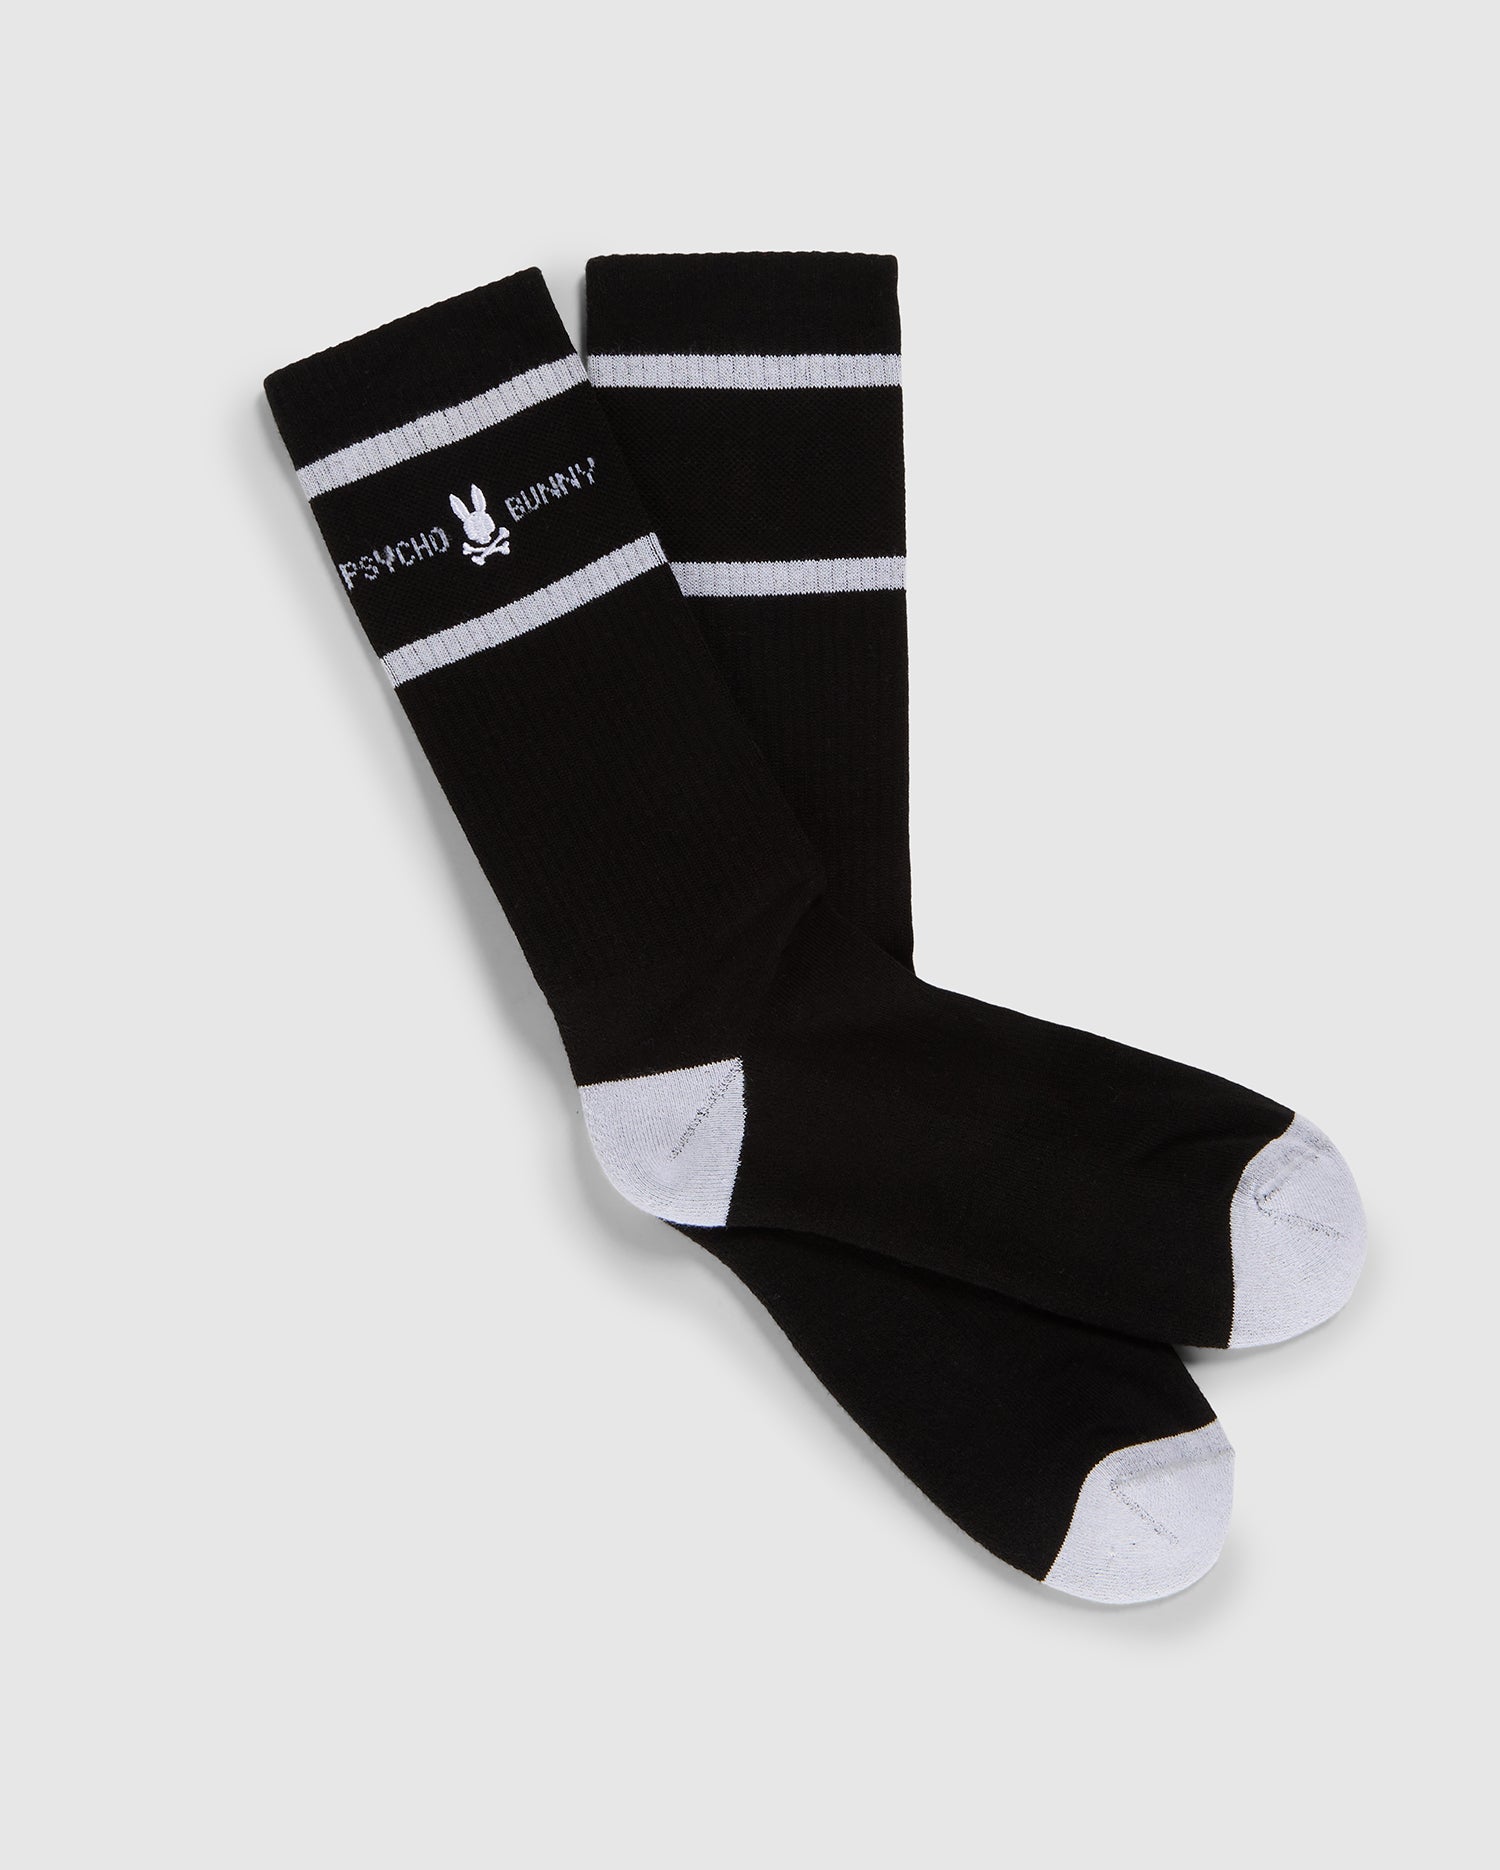 A pair of black knee-high Psycho Bunny fashion socks with white toe and heel patches and two white horizontal stripes near the top, featuring the text 